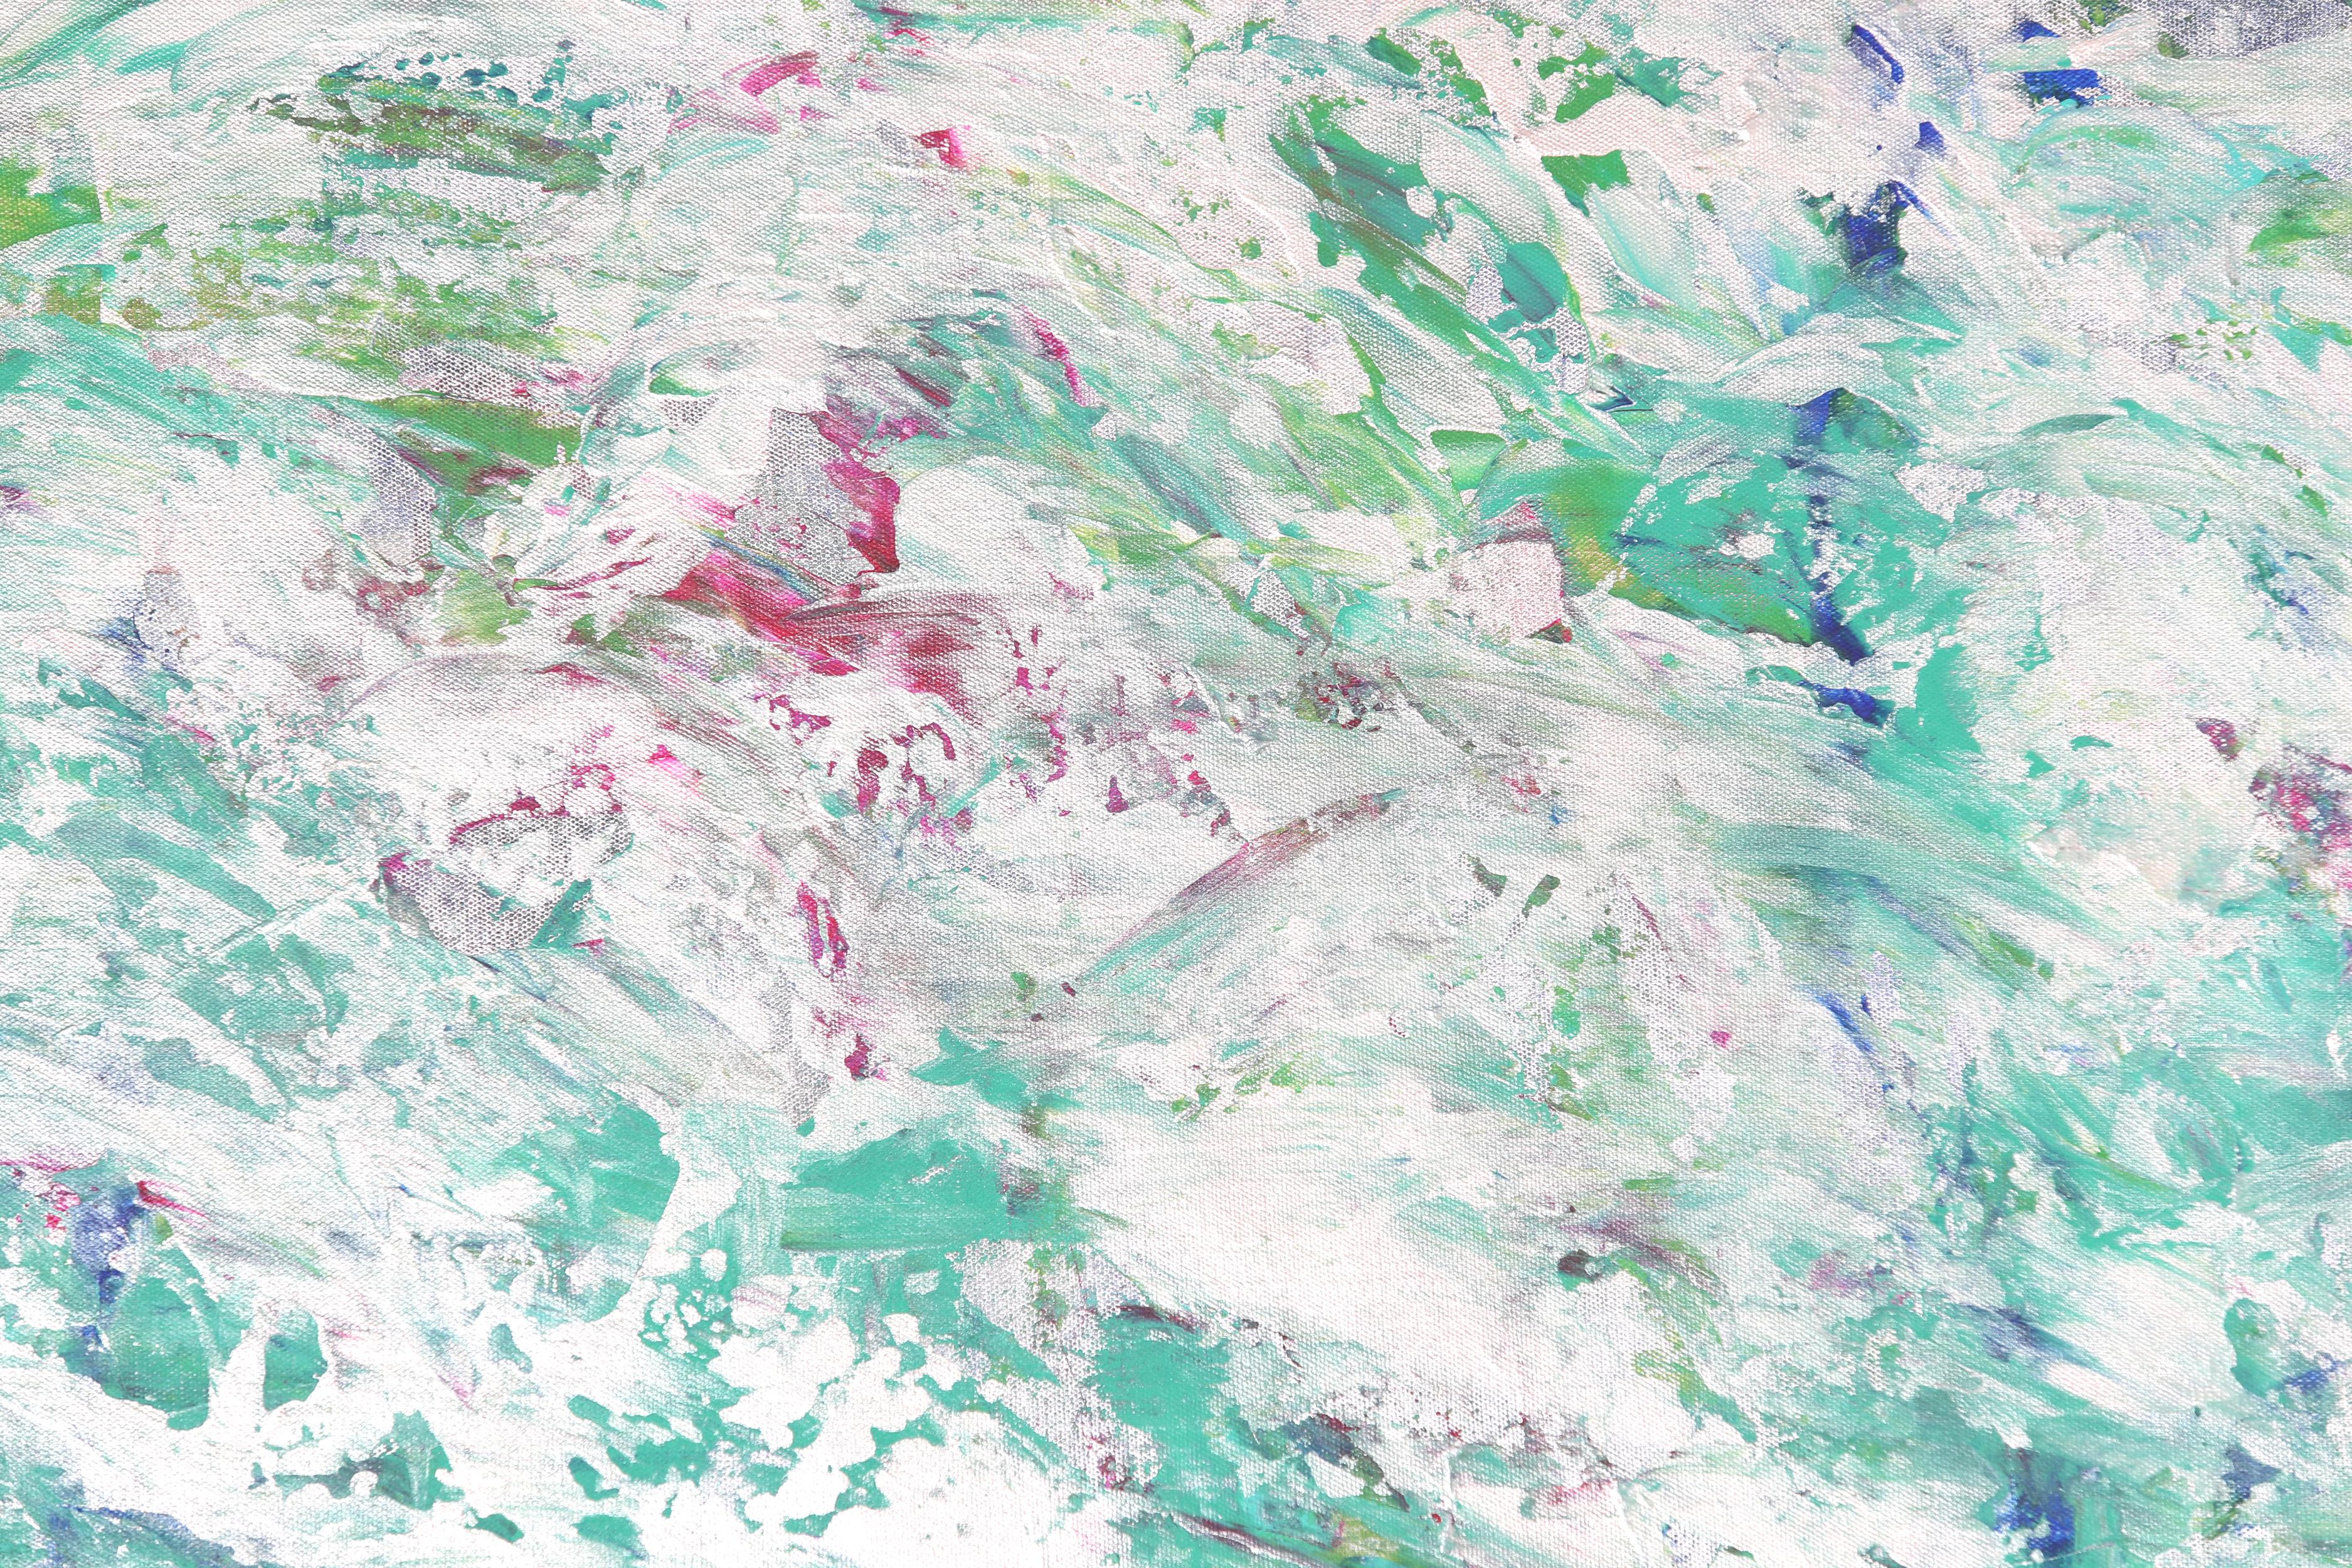 Pearl Paradise - Abstract Expressionist Painting by Estelle Asmodelle